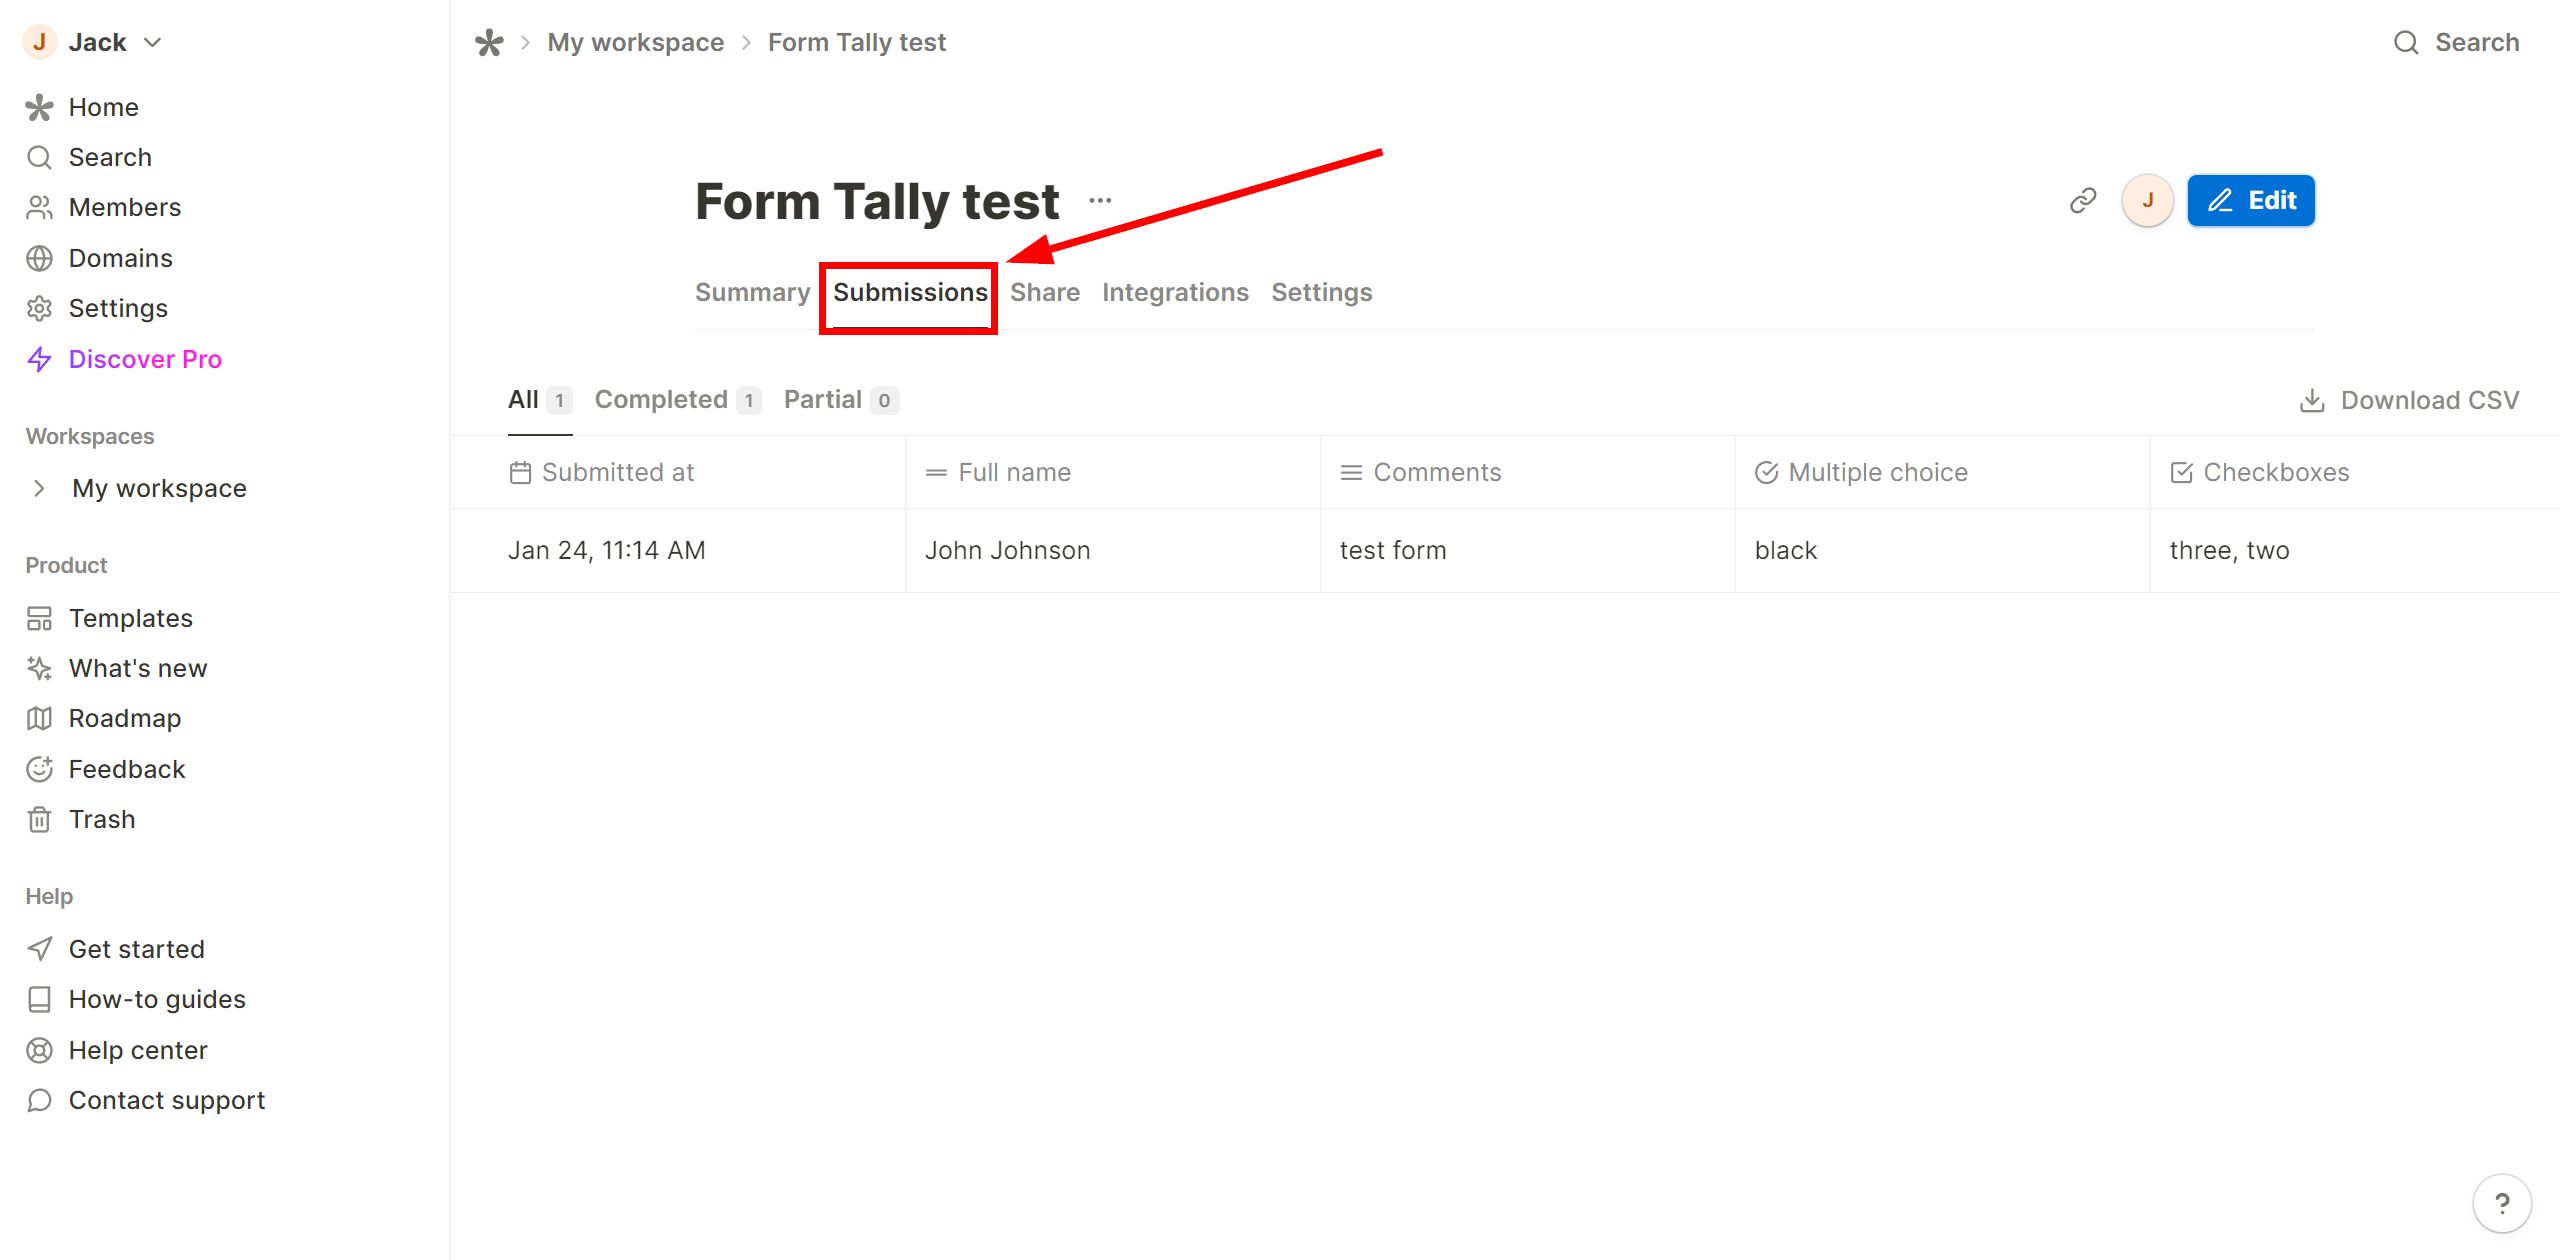 How to Connect Tally as Data Source | Generating test data from a form